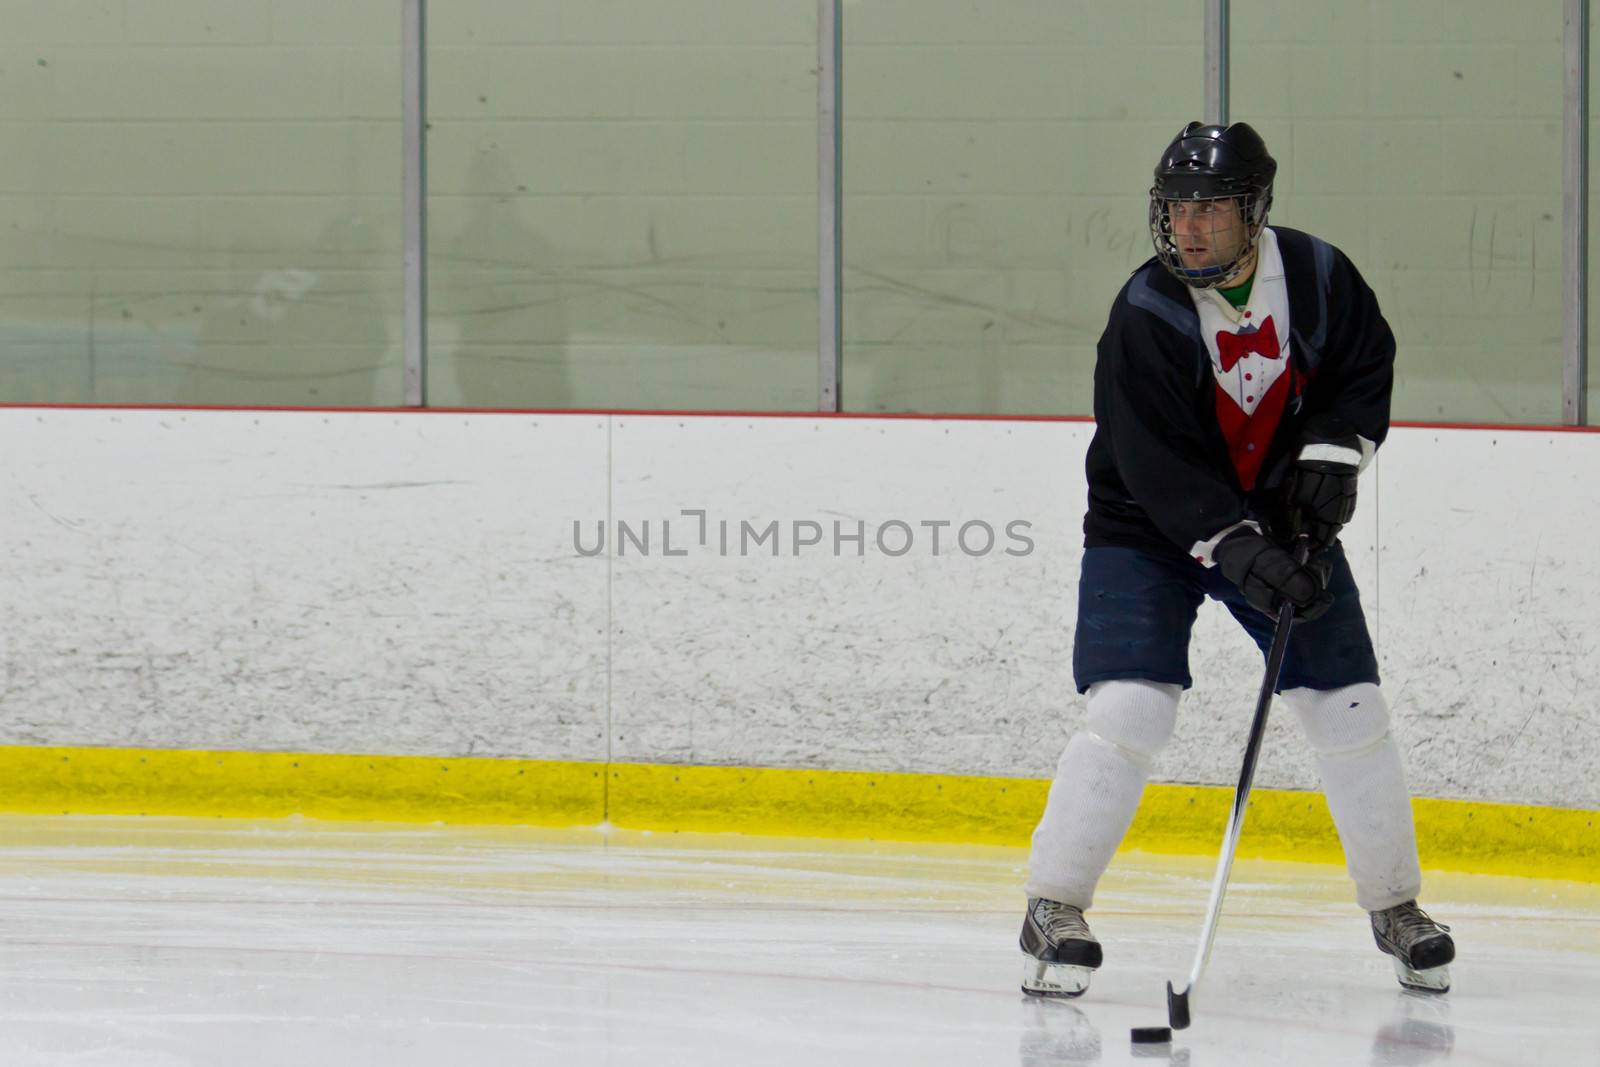 Hockey player during a game by bigjohn36